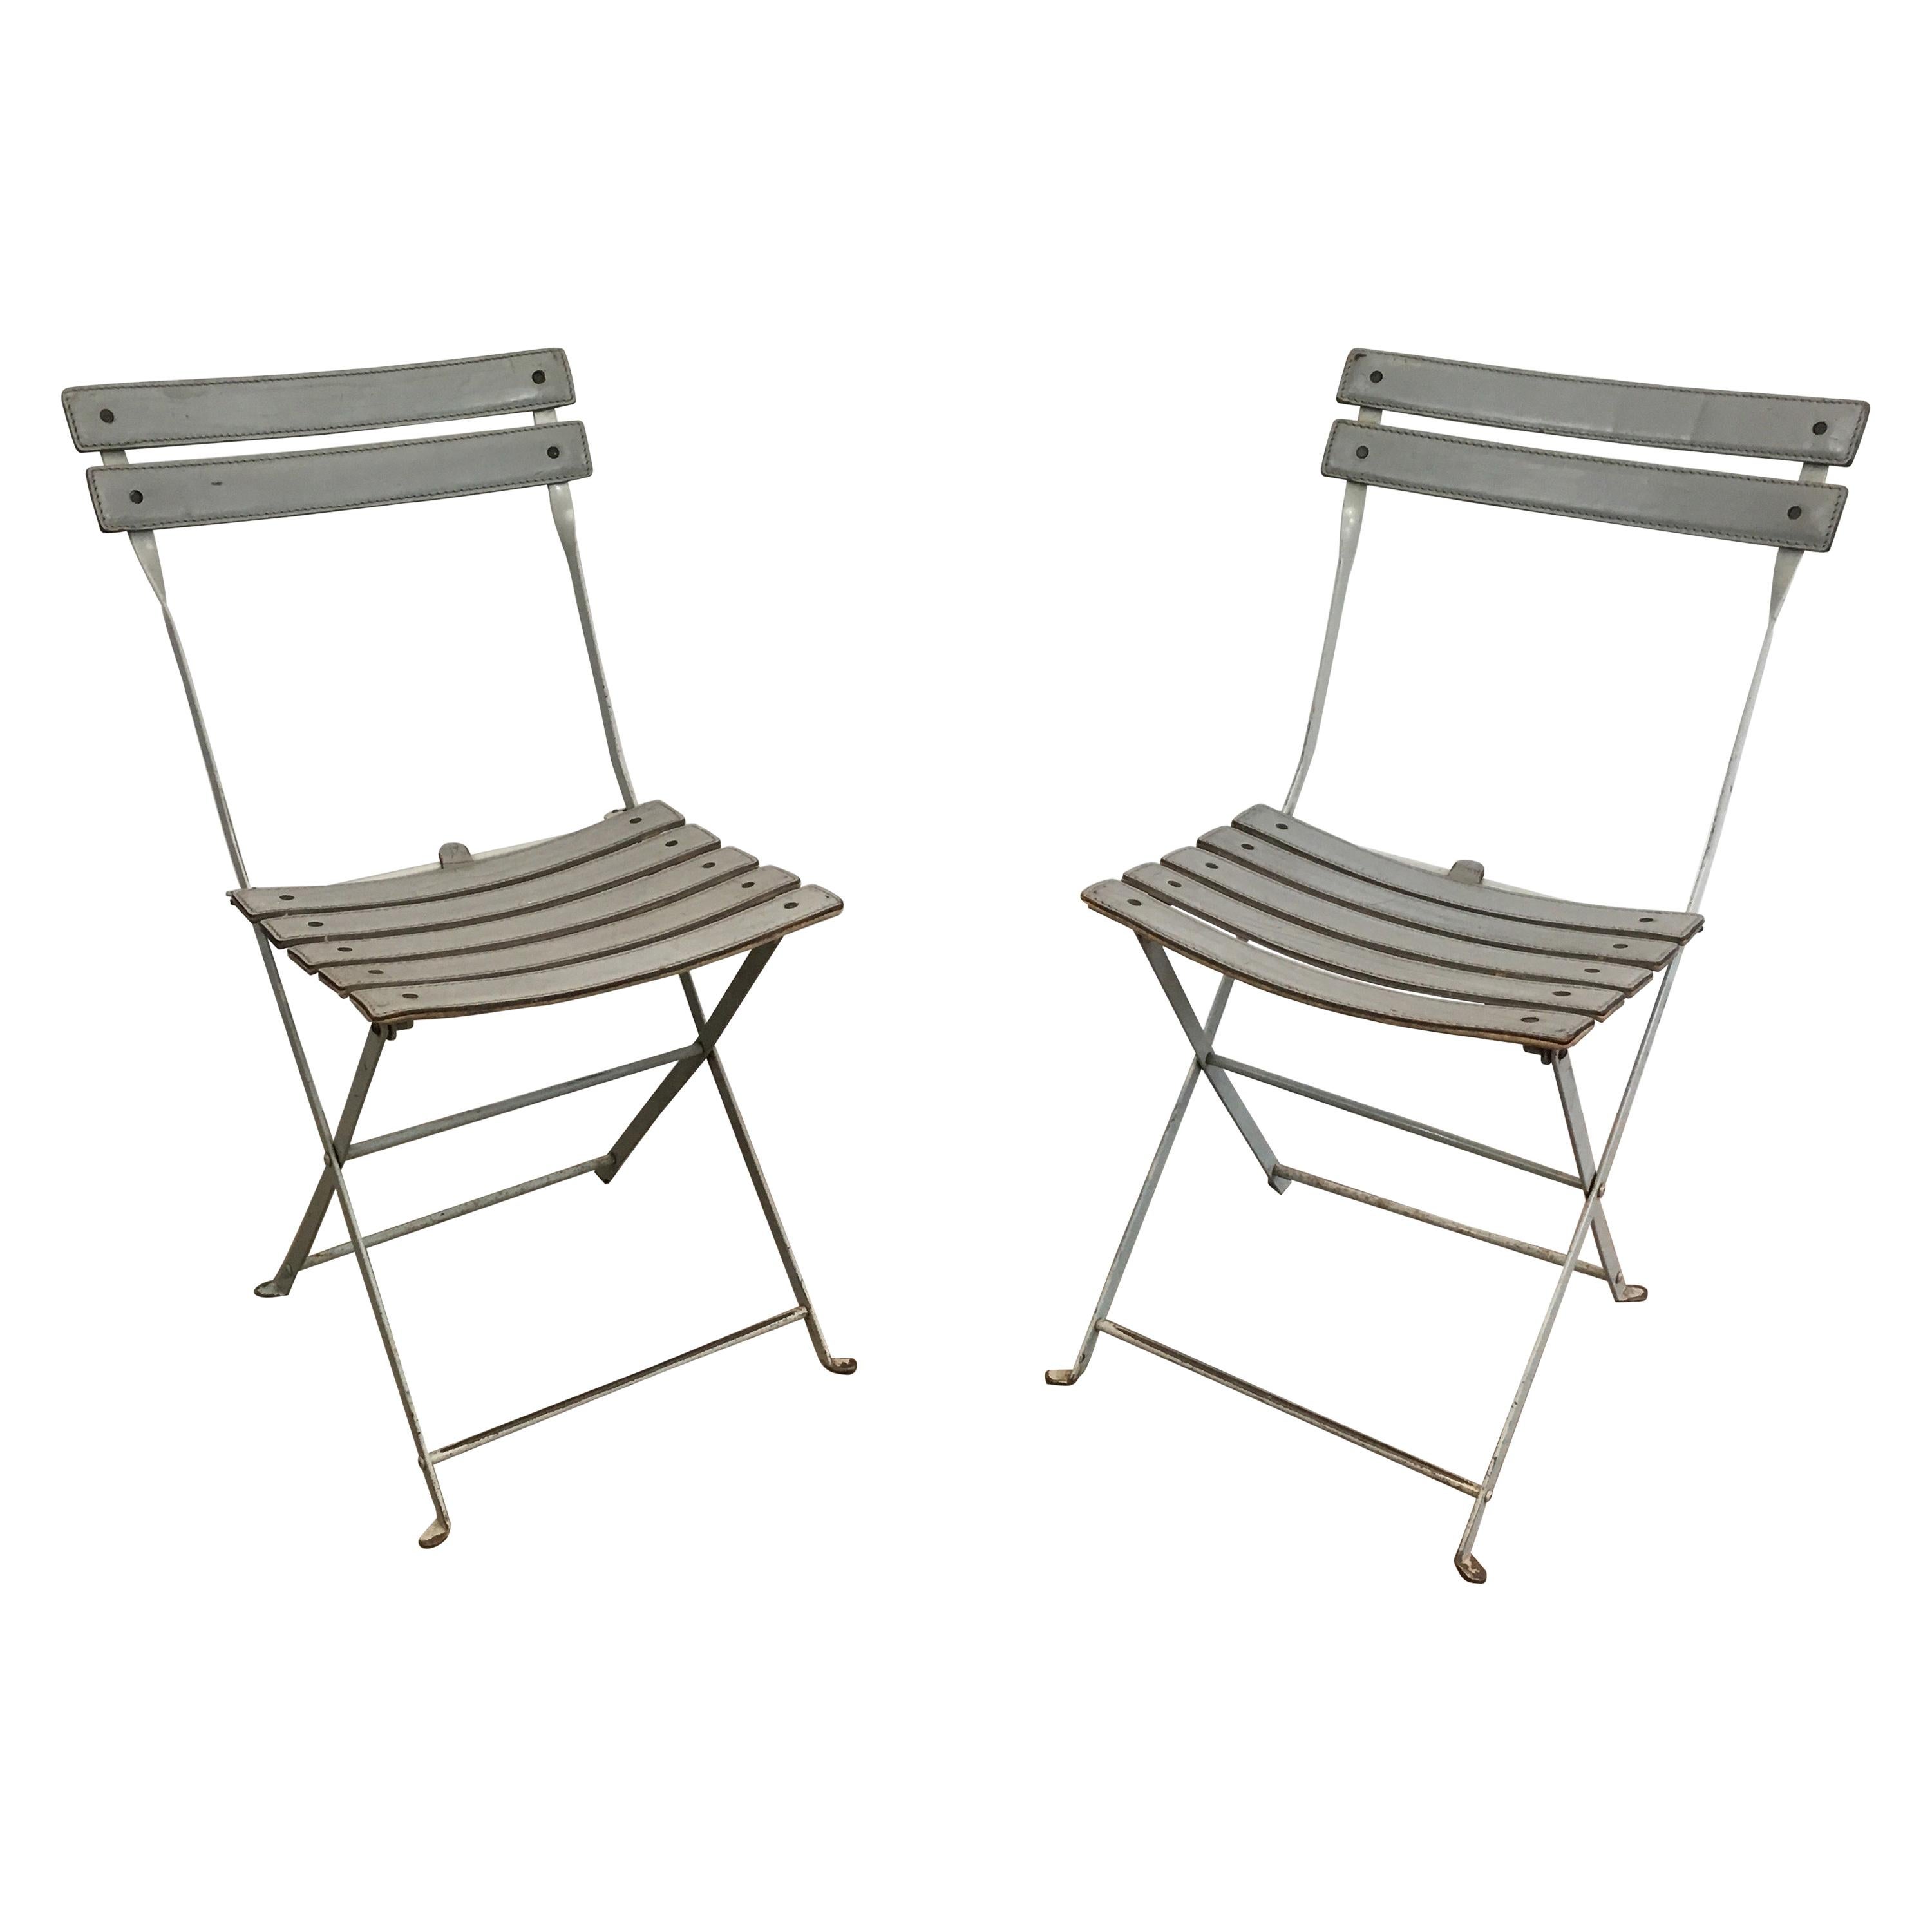 Zanotta, Pair of Grey Leather and White Lacquered Metal Folding Chairs, Italian